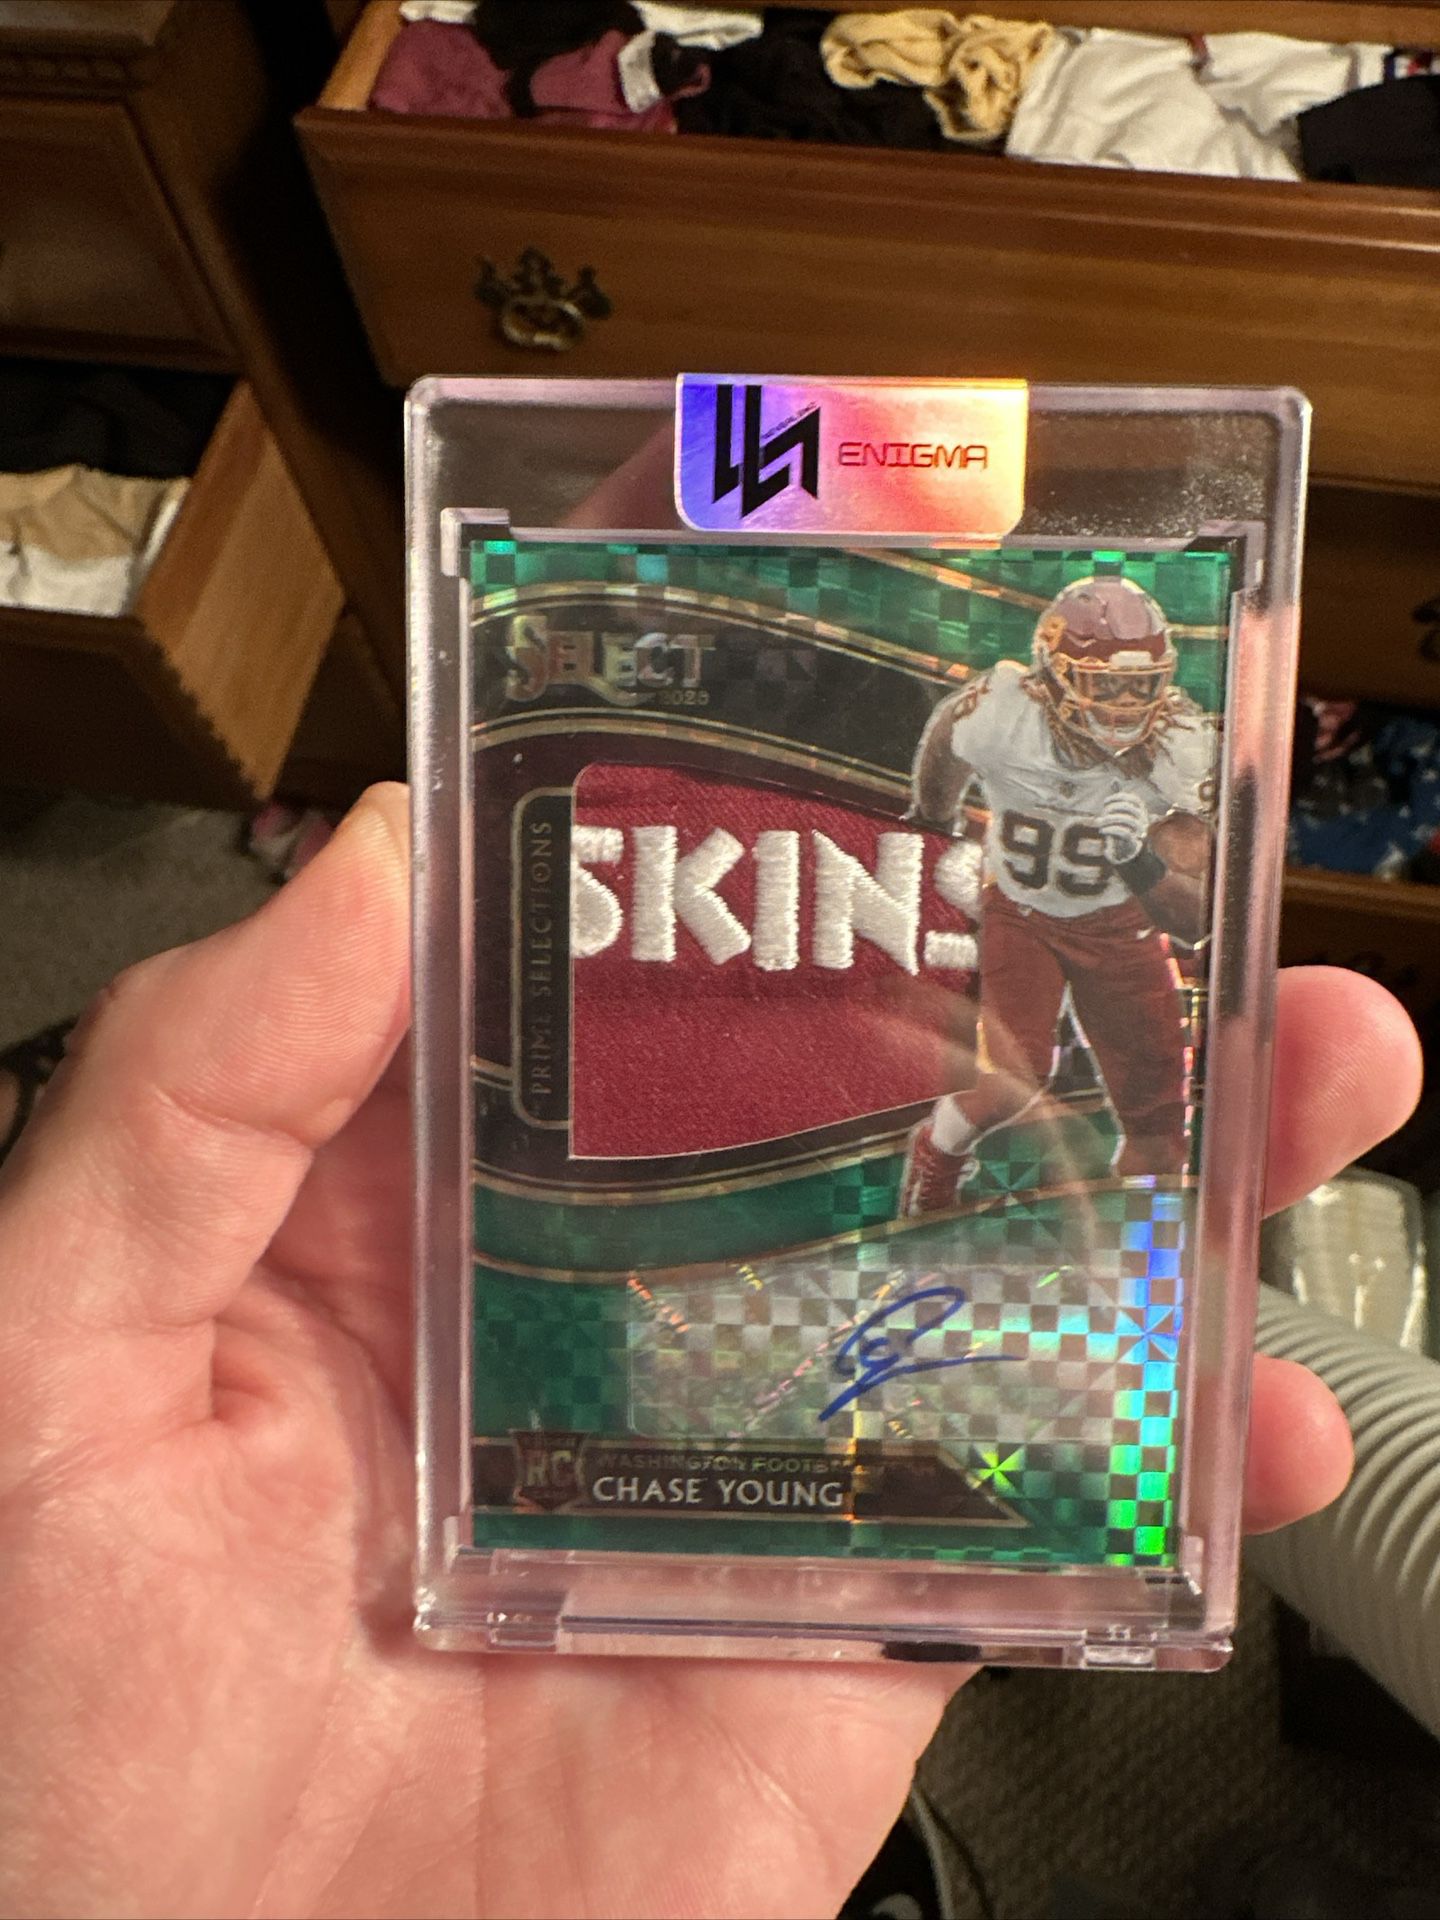 2020 Select Washington Redskins Rookie Chase Young RPA /5 (SKINS NAME PLATE!!)